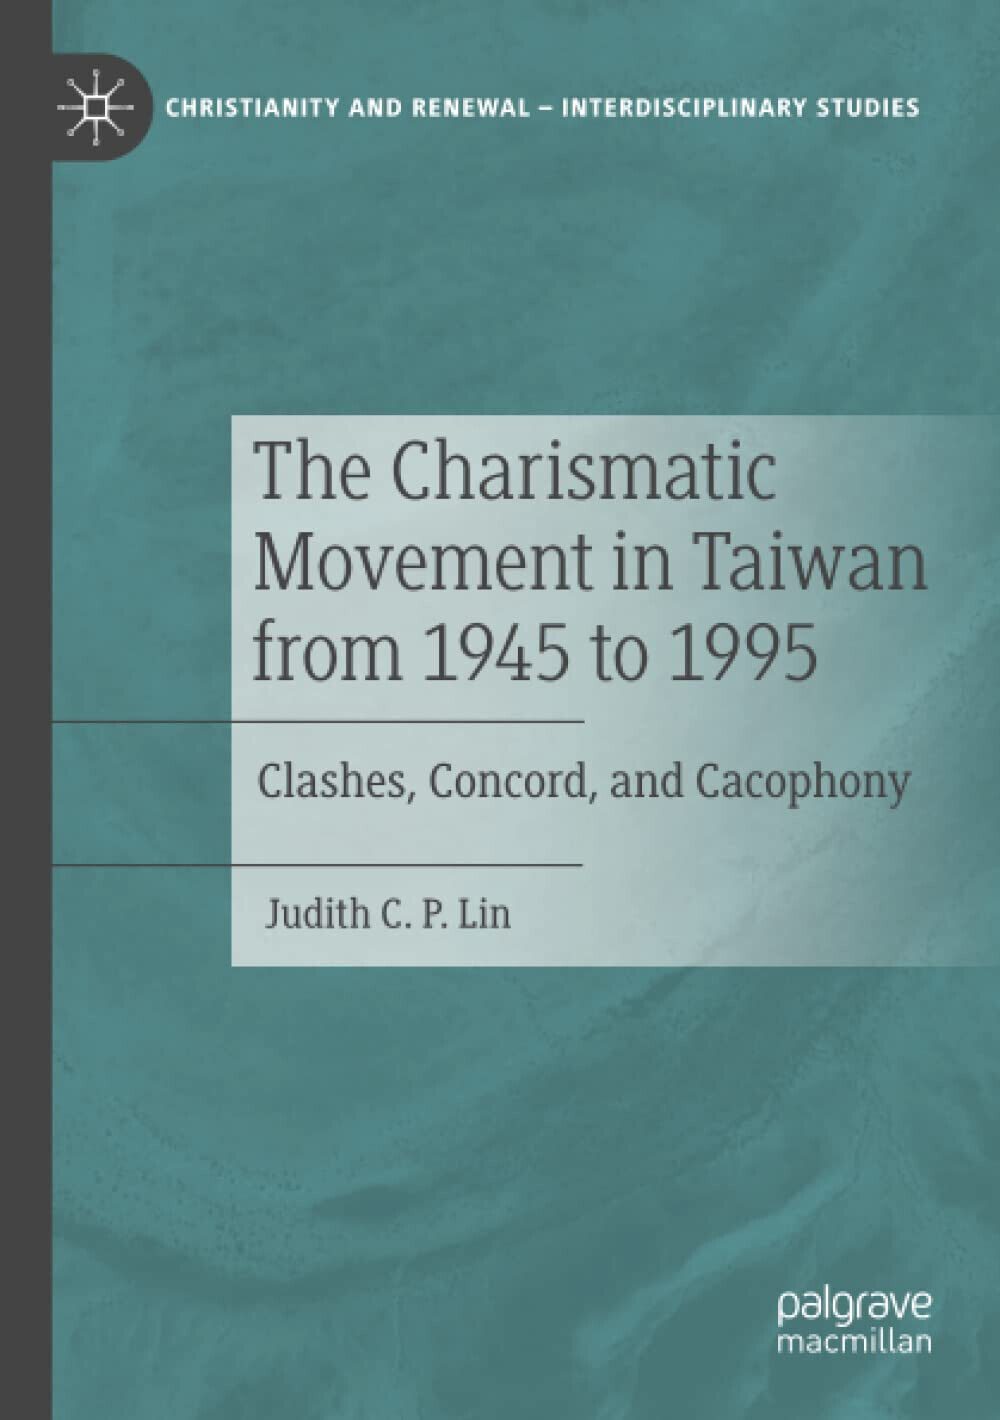 The Charismatic Movement In Taiwan From 1945 To 1995 - Judith C.P. Lin, 2021